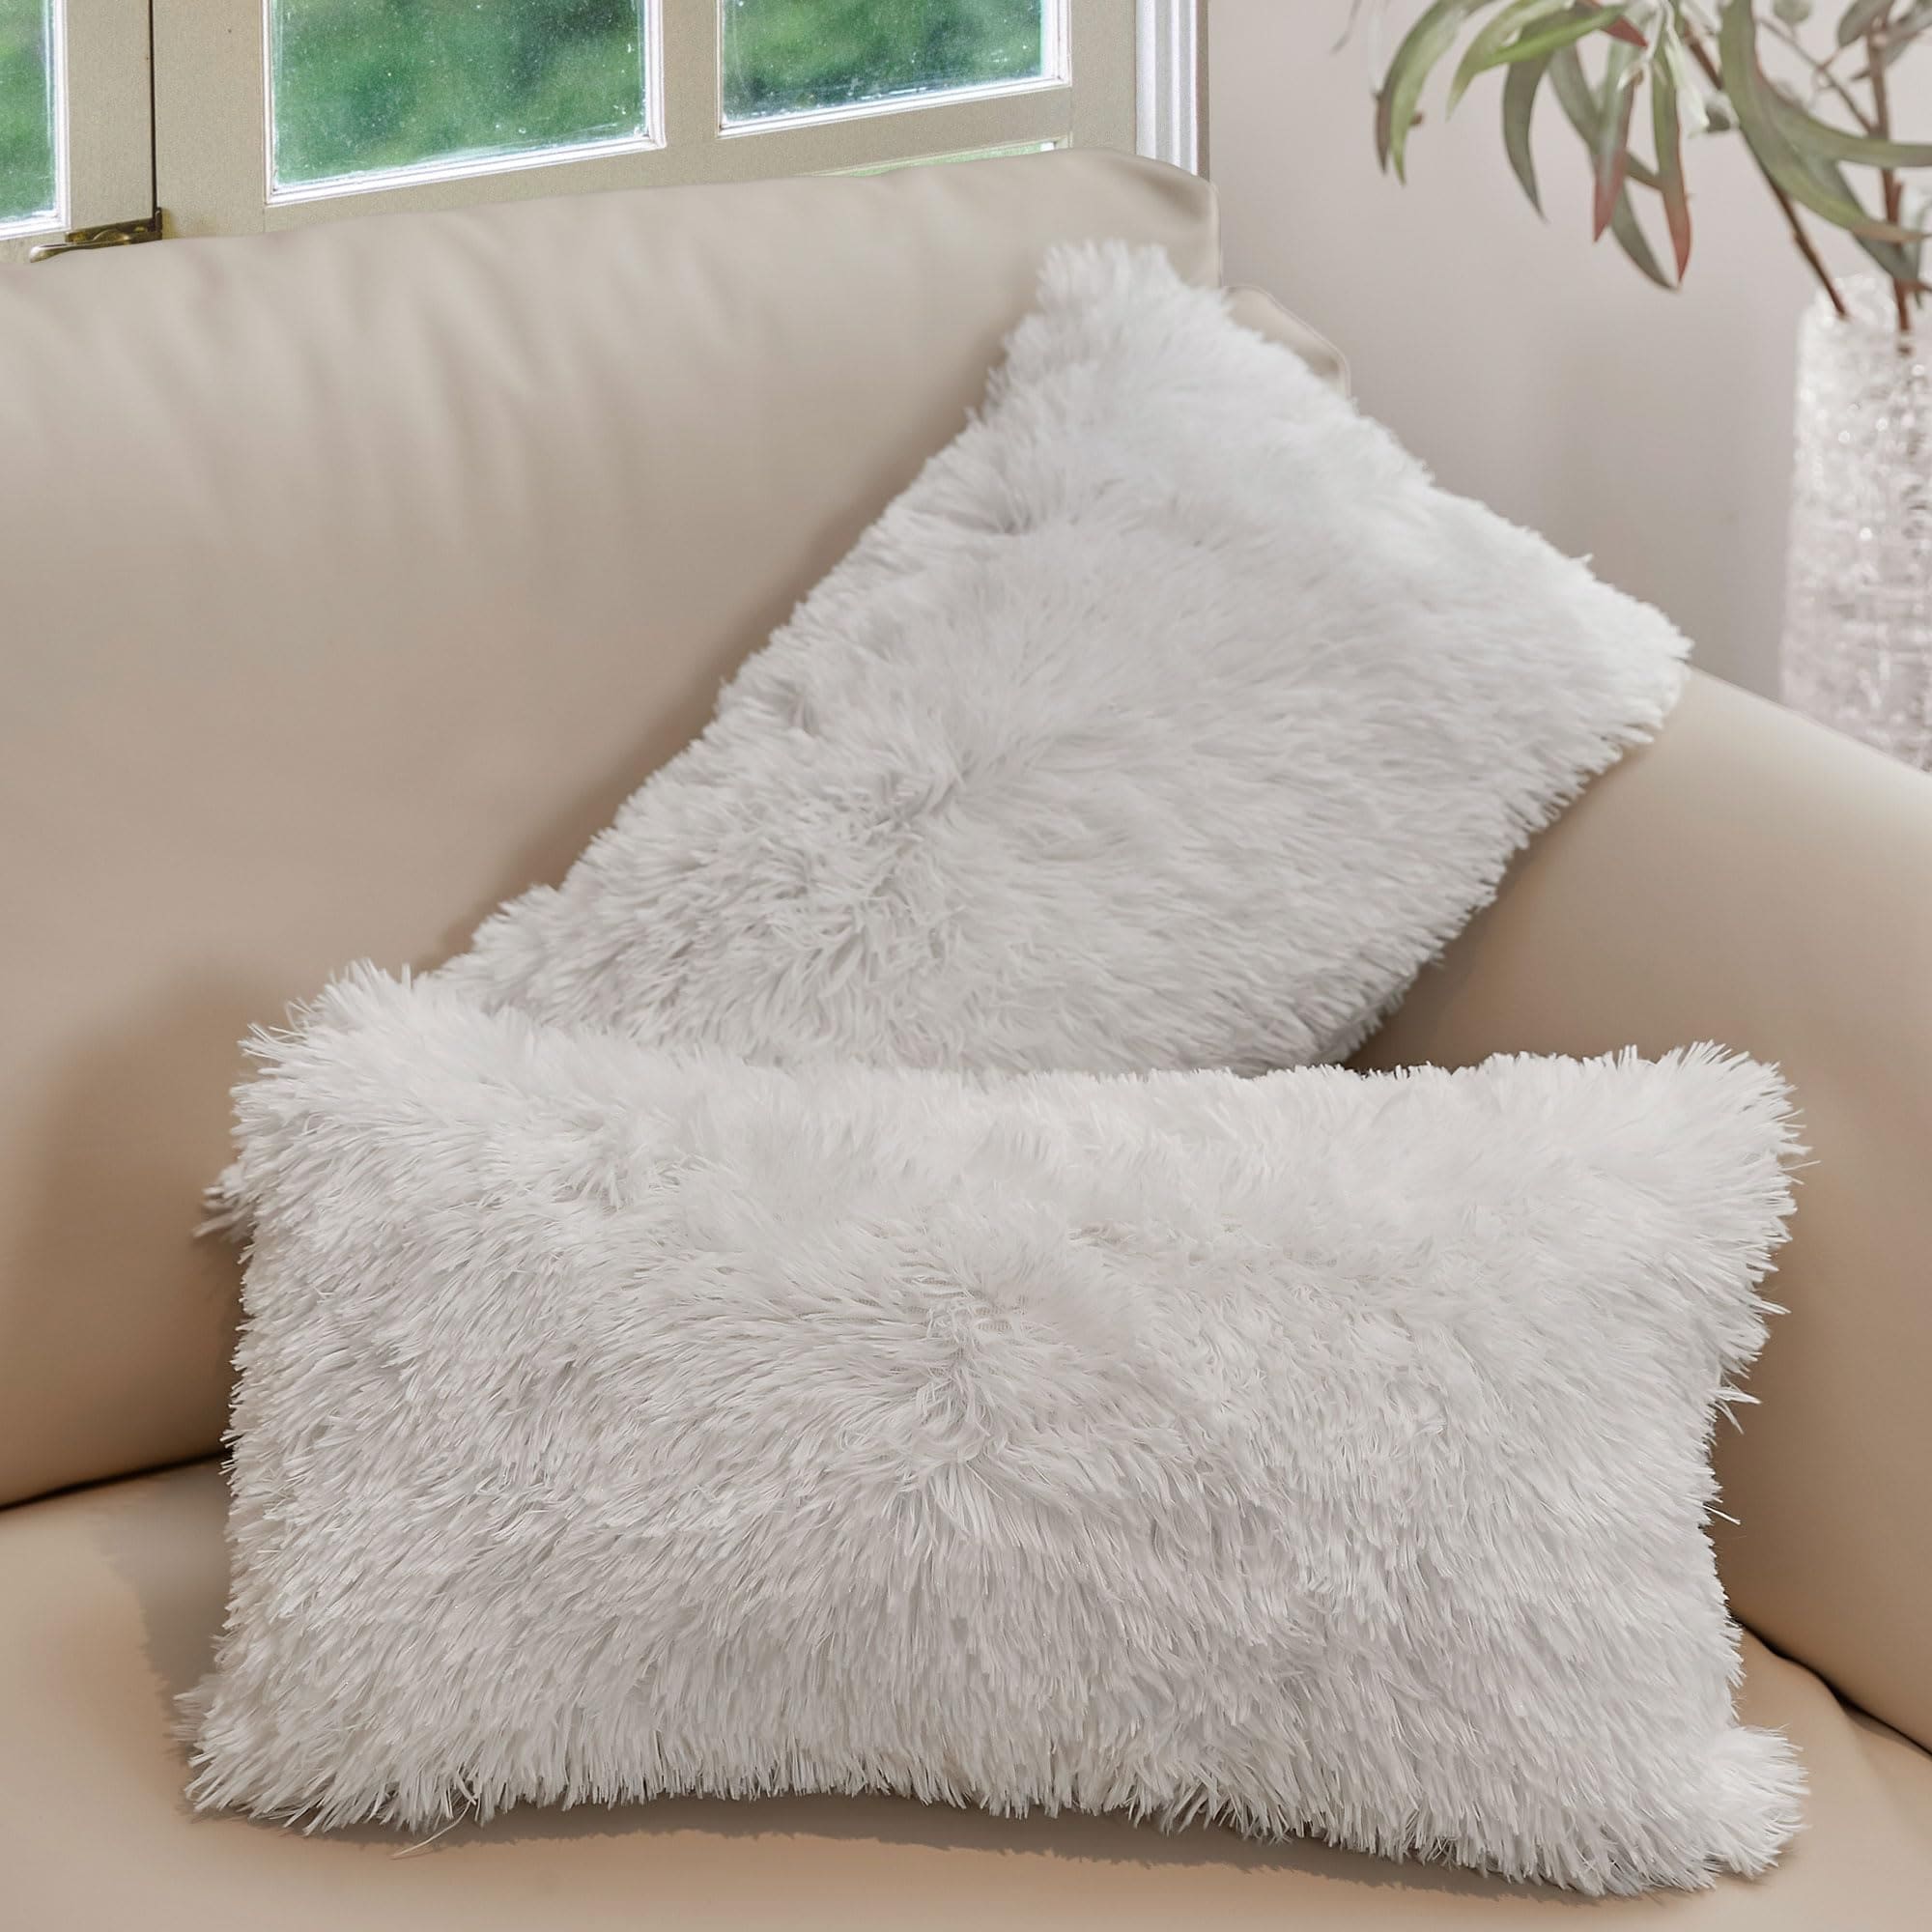 Cheer Collection Faux Fur Pillows - Decorative Throw Pillows for Couch &  Bed - Machine Washable - 18 x 18 - Maroon (Set of 2)